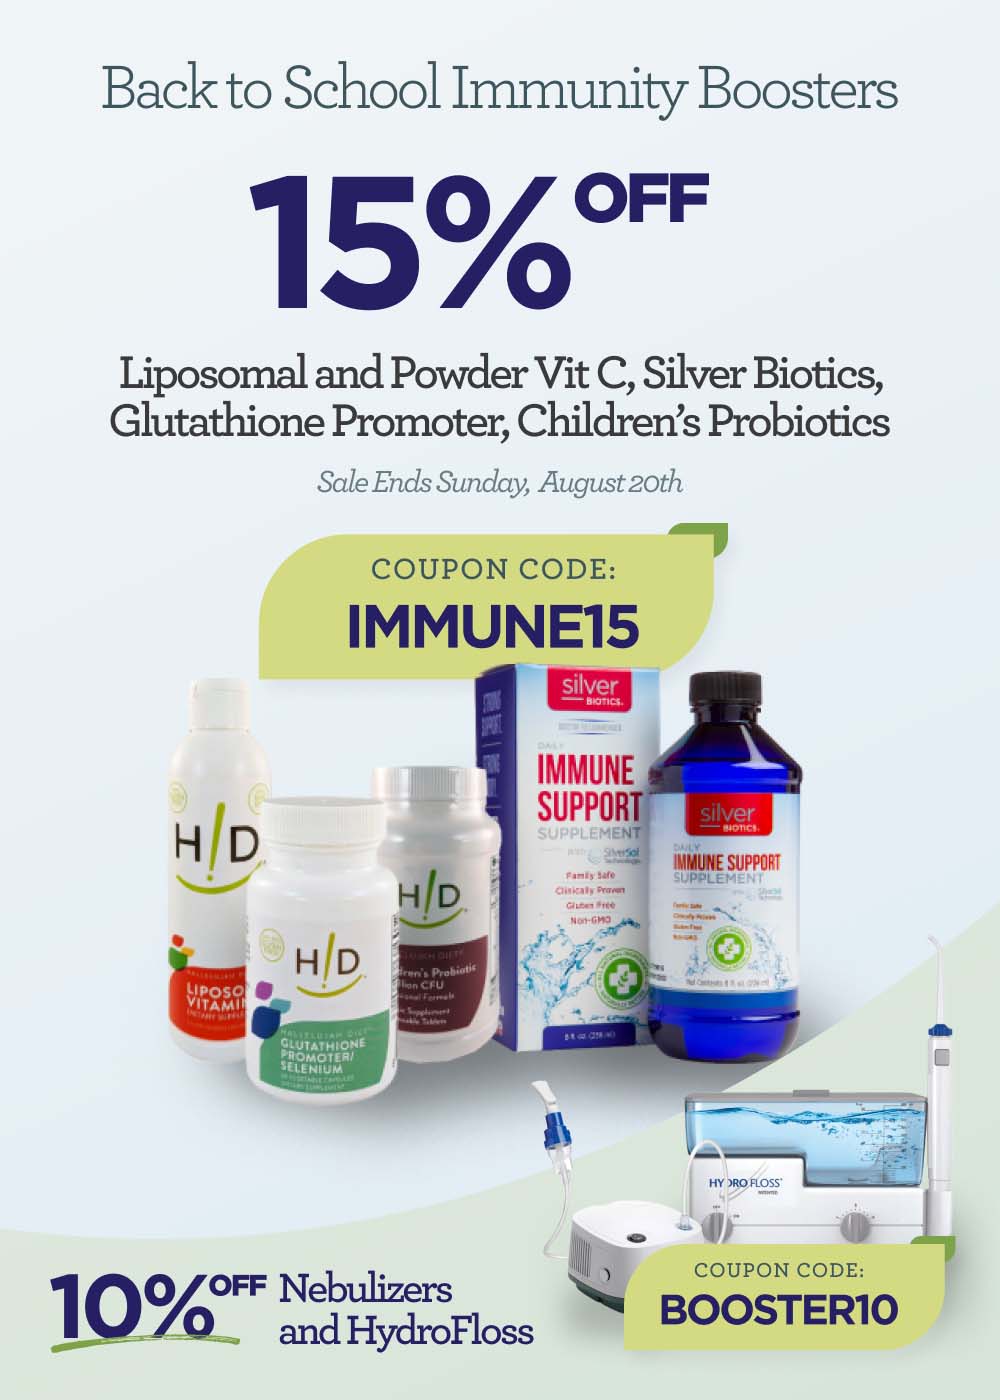 Back to School Immunity Boosters Sale